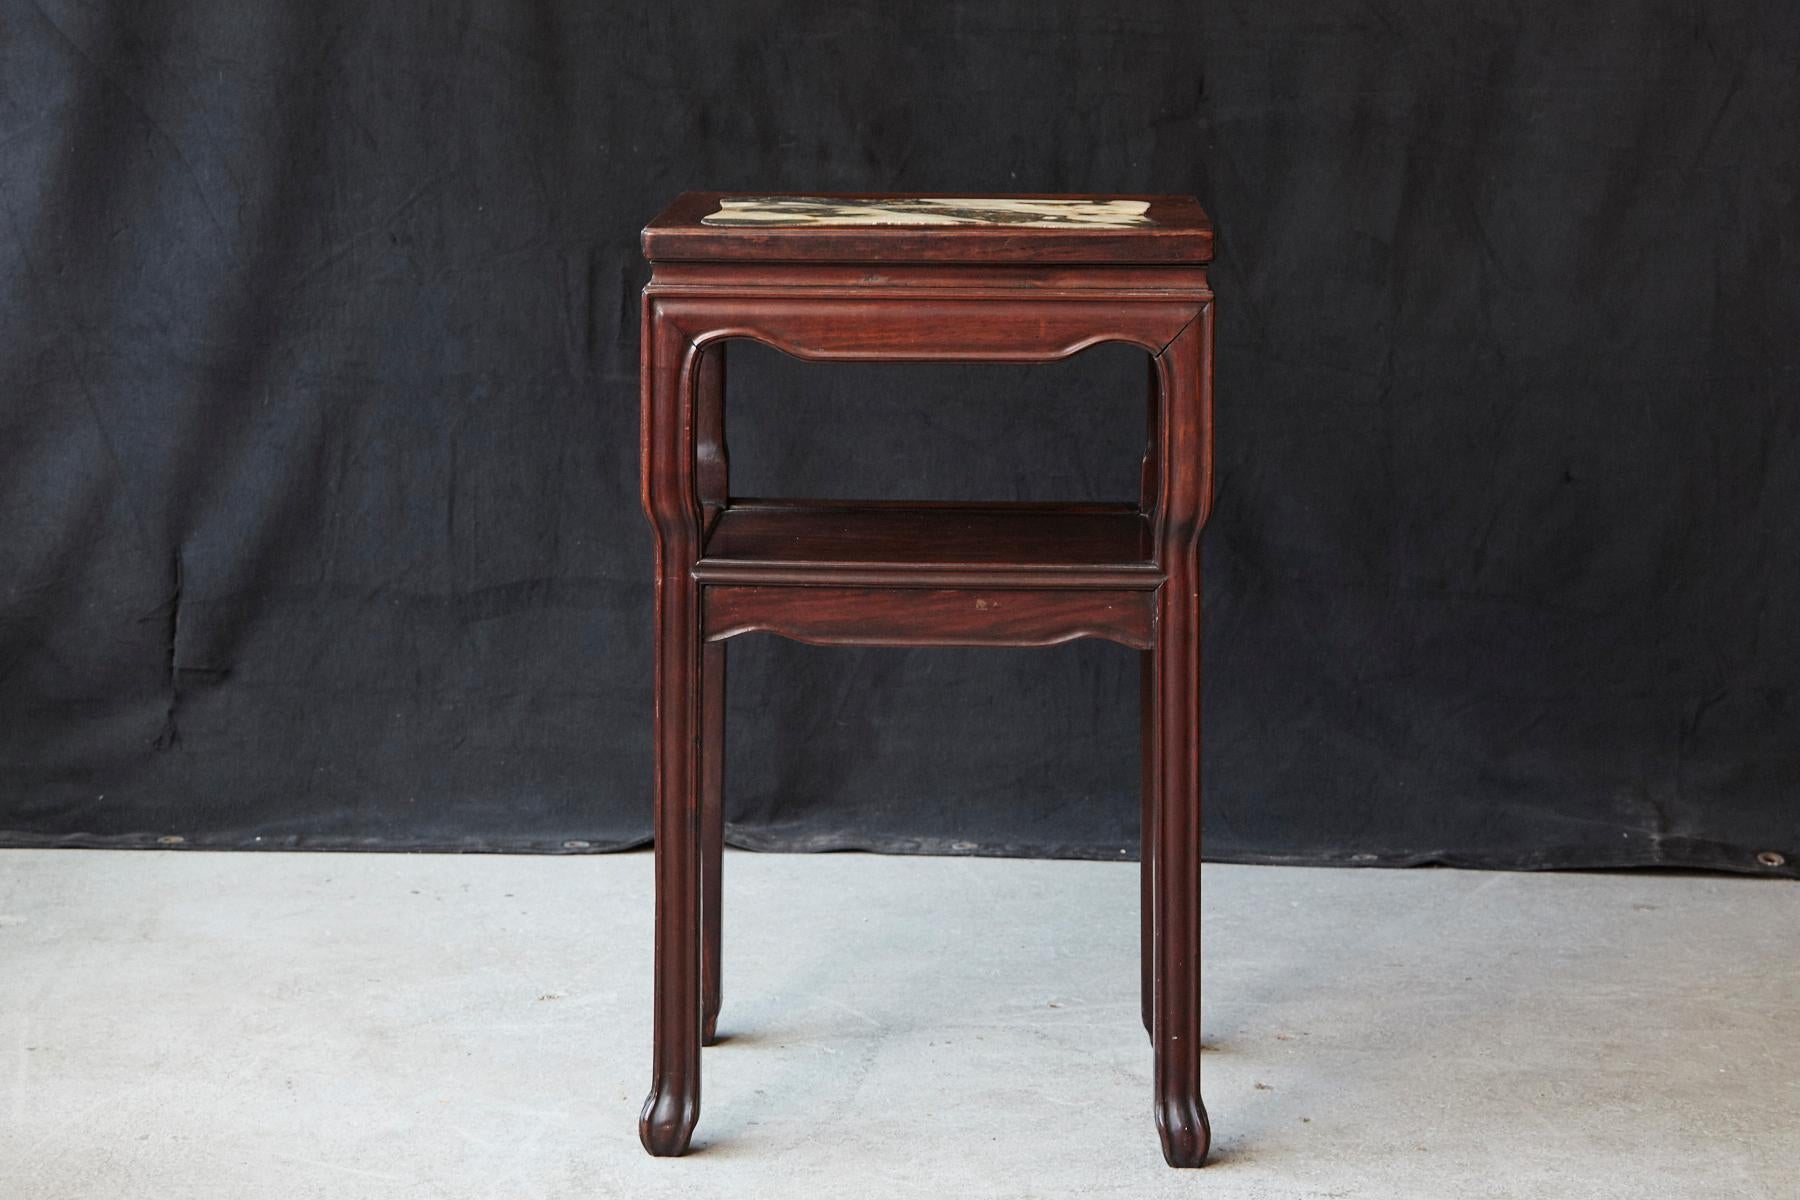 Early 20th century Chinese rectangular hardwood table with minimalistic molded carvings on the panels and legs, rectangular marble inset with rounded corners, one shelf and square legs ending in symbolic claw feet.
There are some minor flaws to the